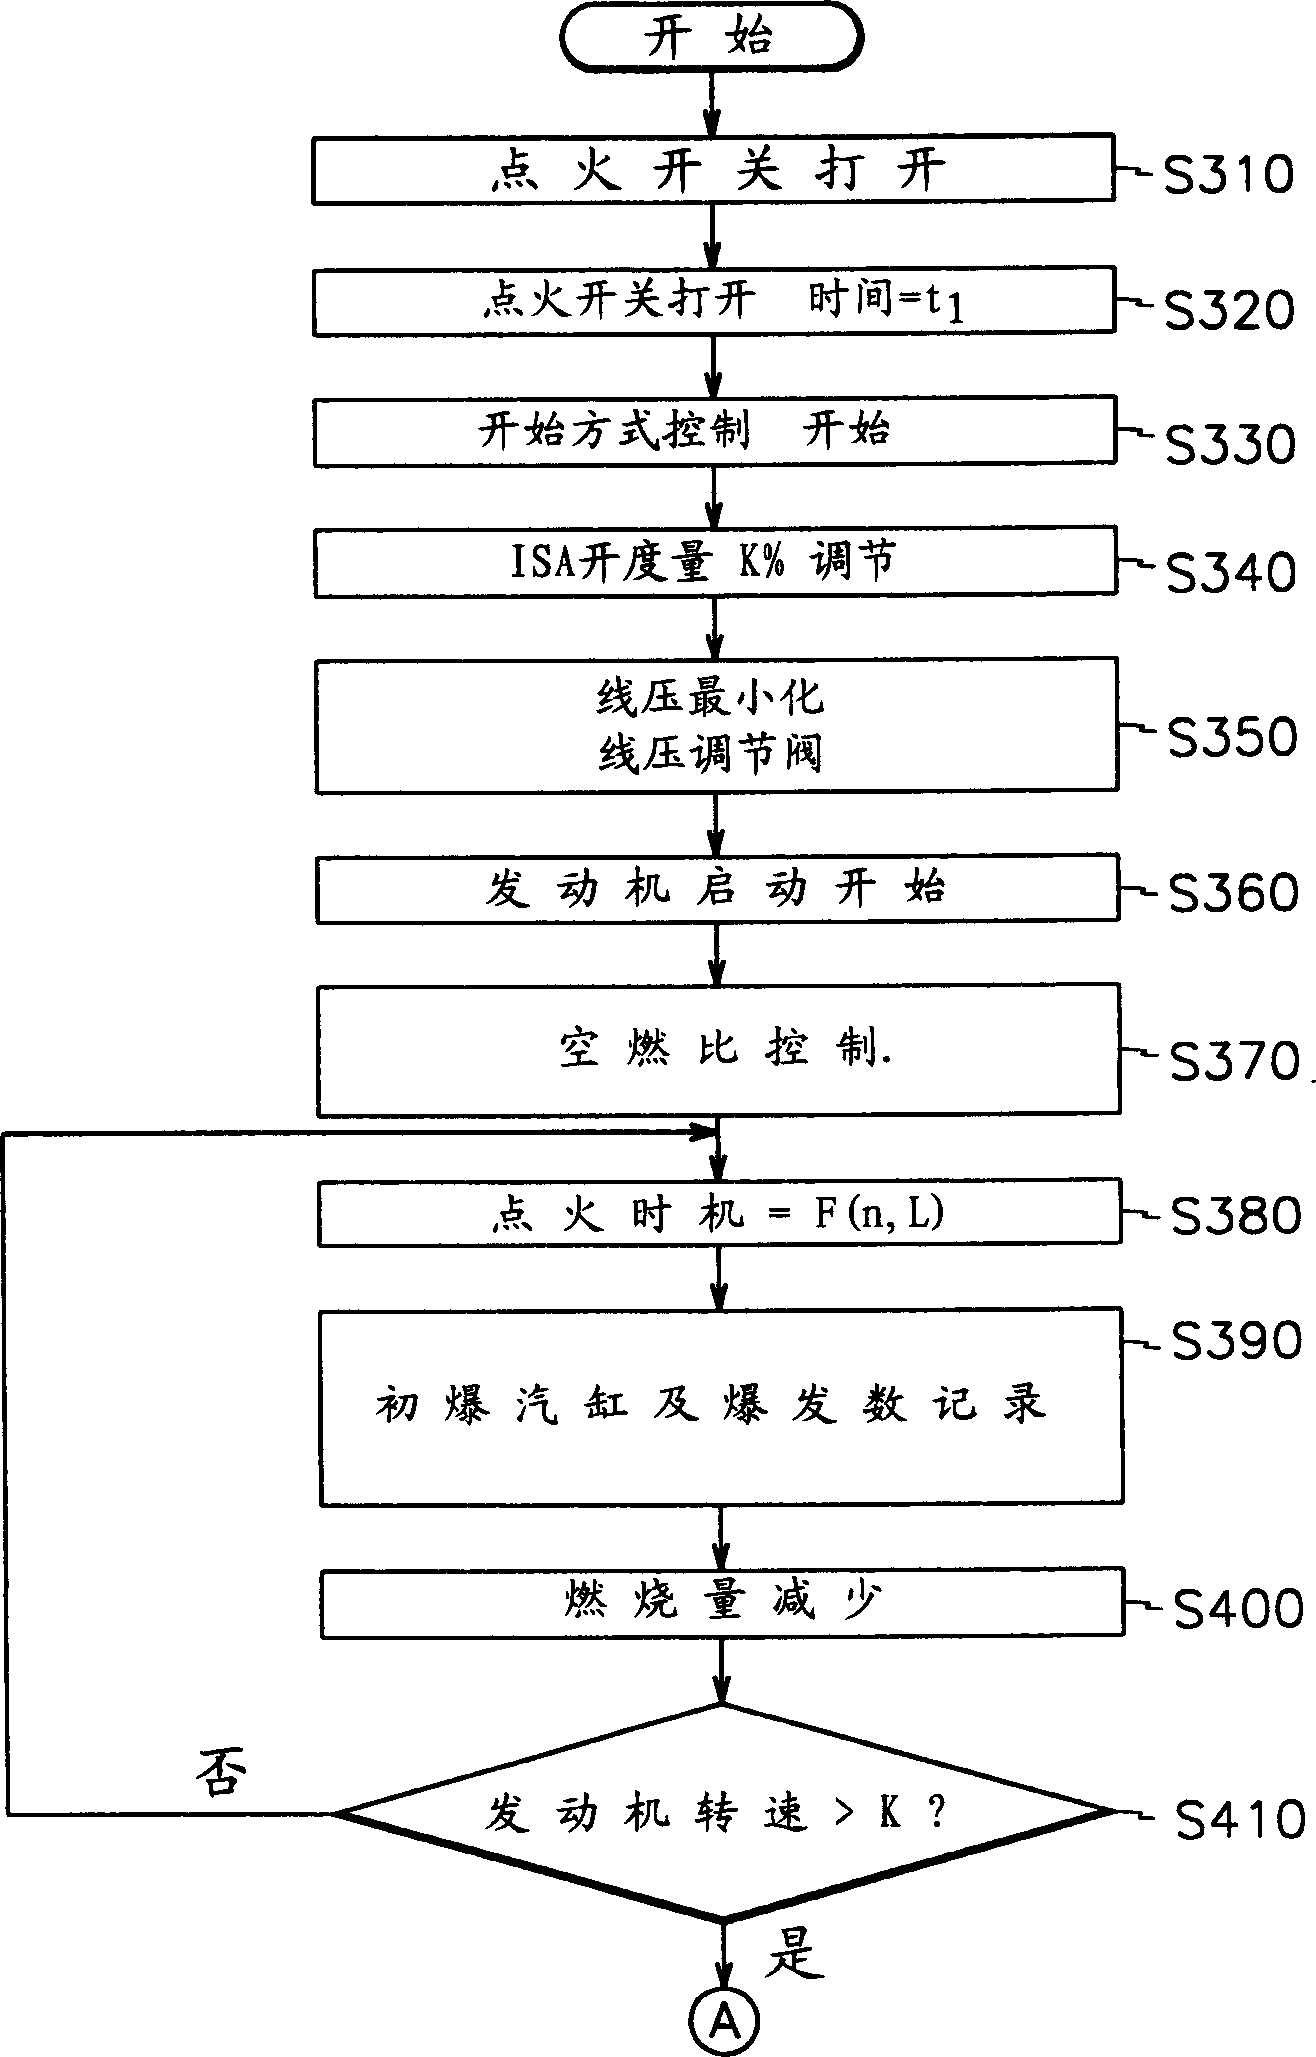 Method for control of engine to reduce exhaust gas during cold starting and idling of car